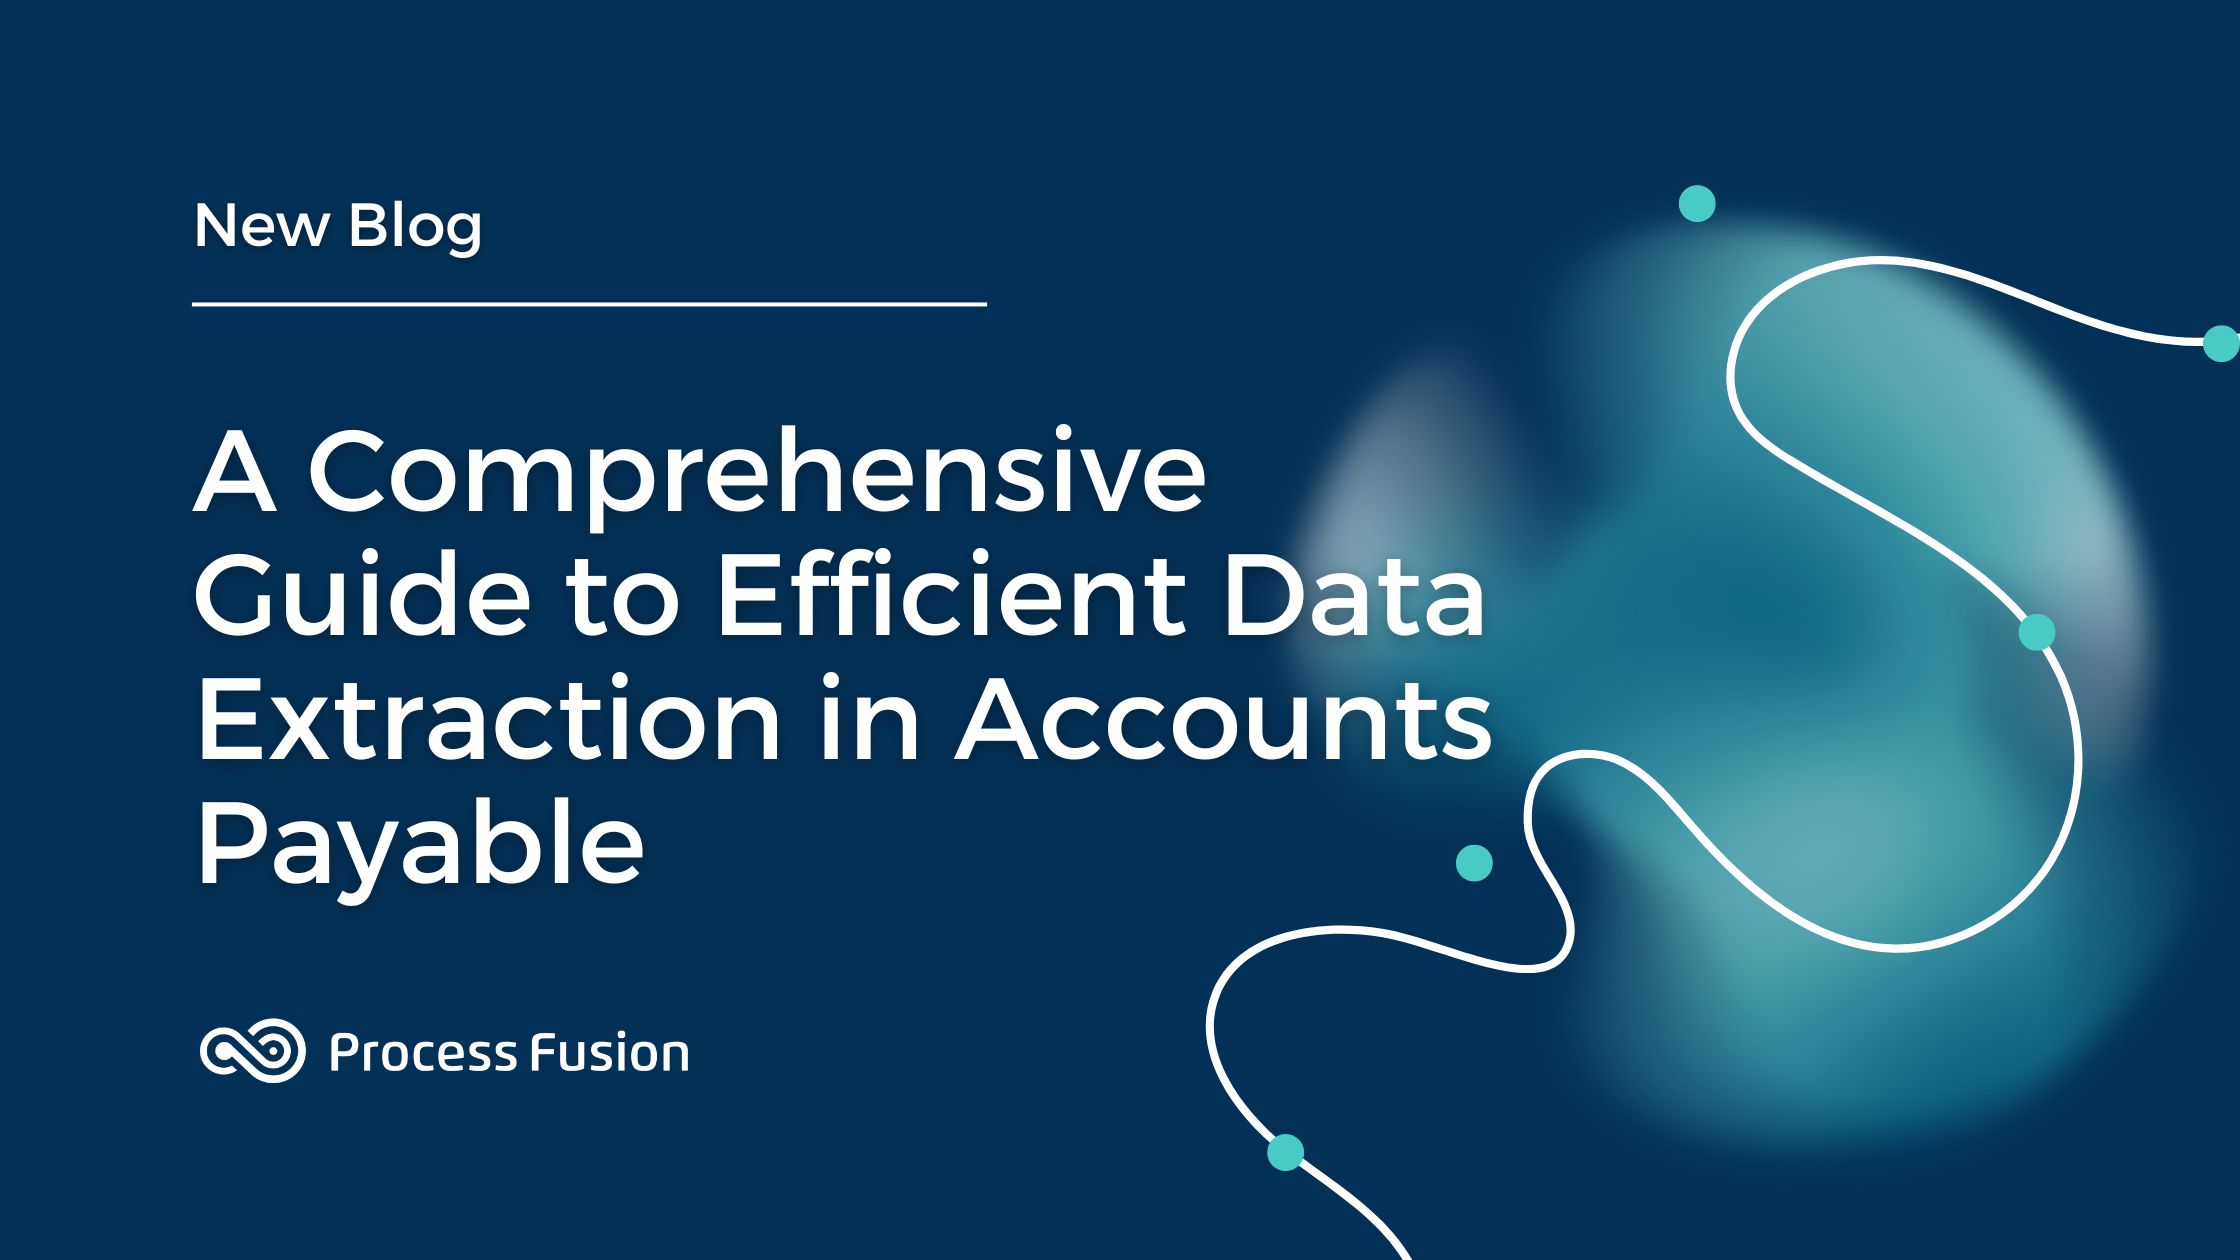 A Comprehensive Guide to Efficient Data Extraction in Accounts Payable